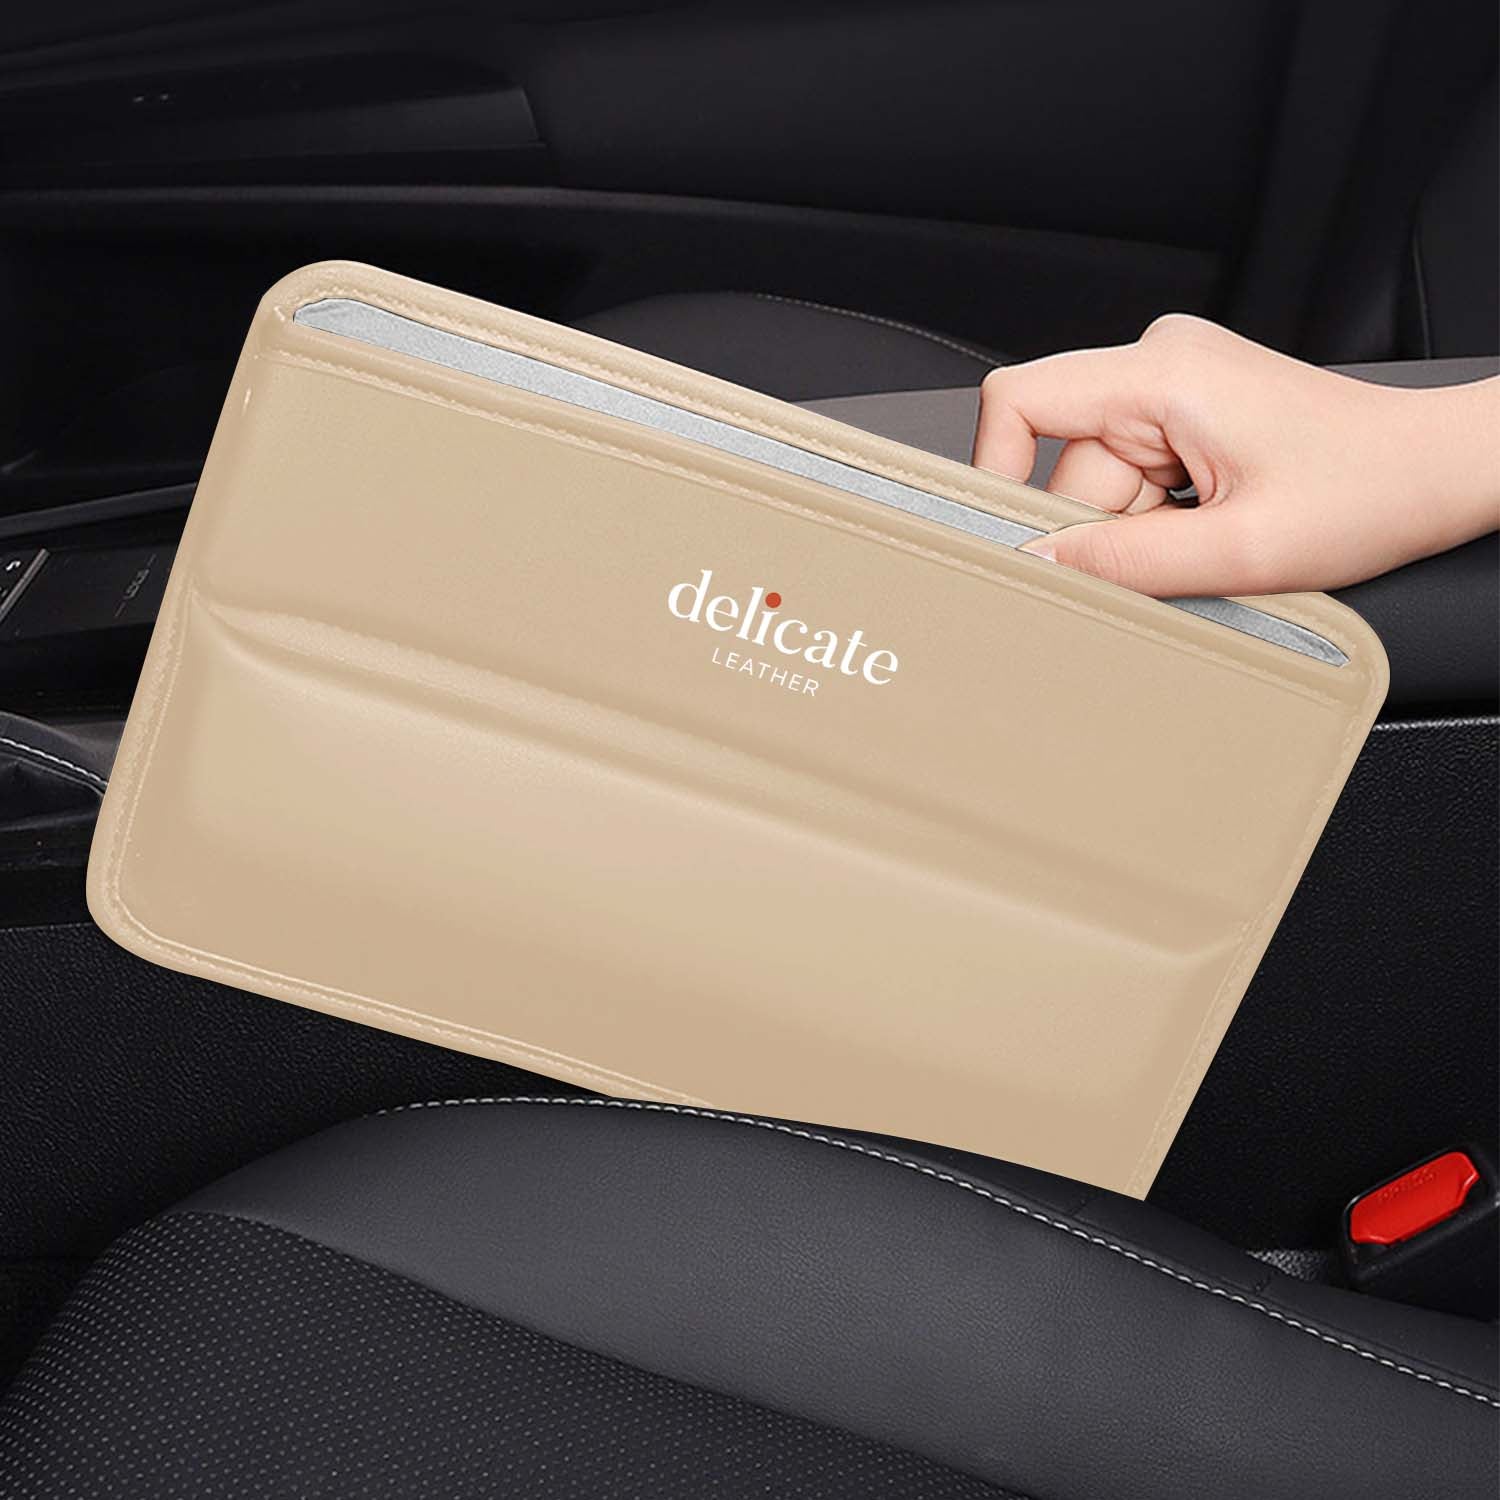 Car Seat Gap Filler Organizer, Custom Logo For Your Cars, Multifunctional PU Leather Console Side Pocket Organizer for Cellphones, Cards, Wallets, Keys - Delicate Leather